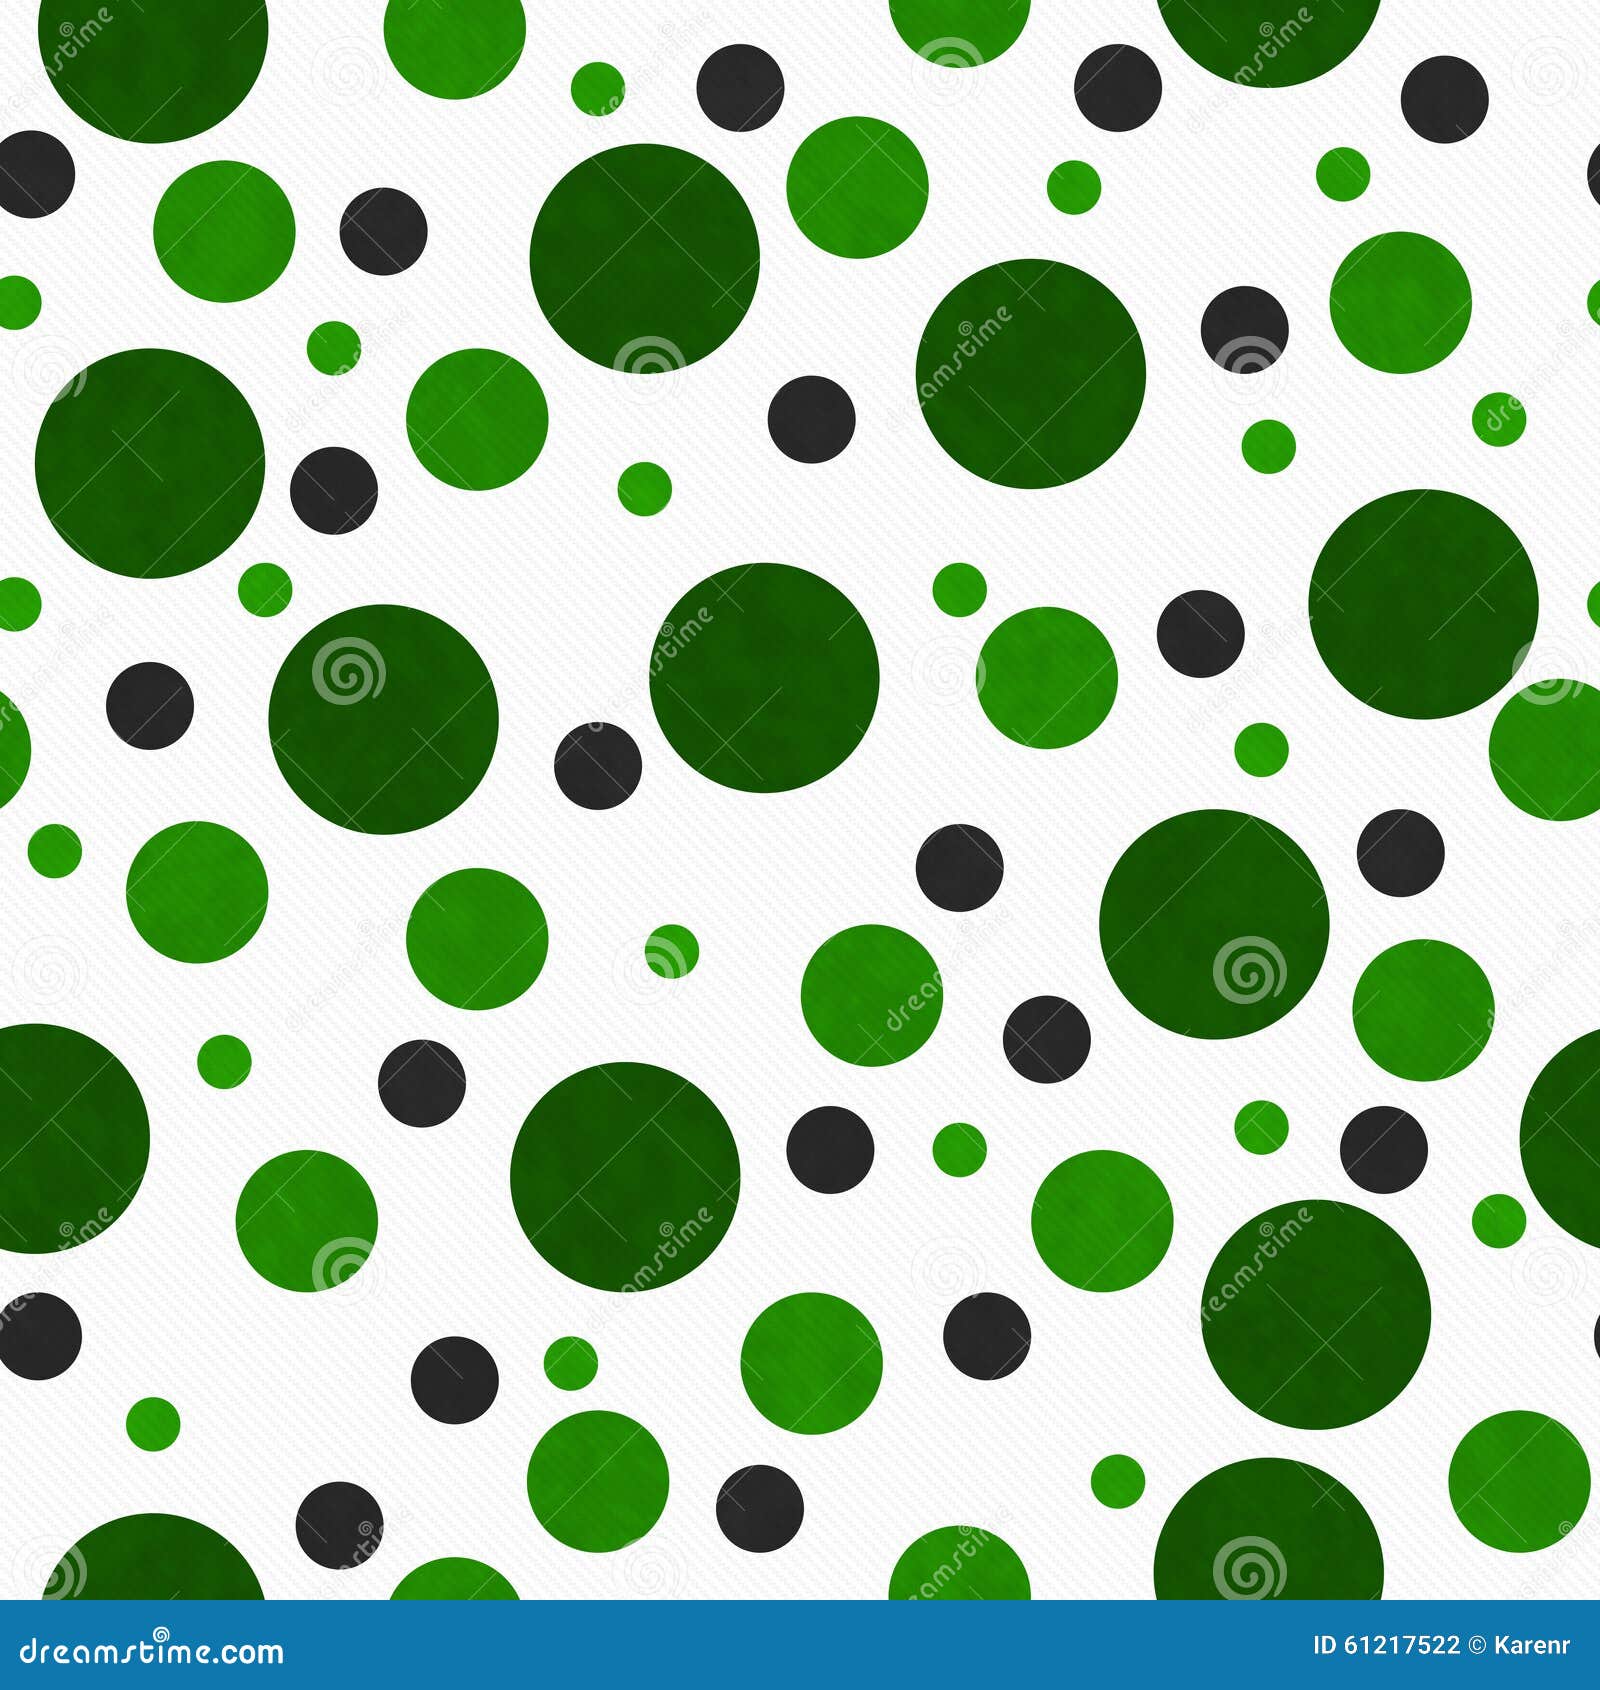 Green and White Polka Dot Tile Pattern Repeat Background Stock ...